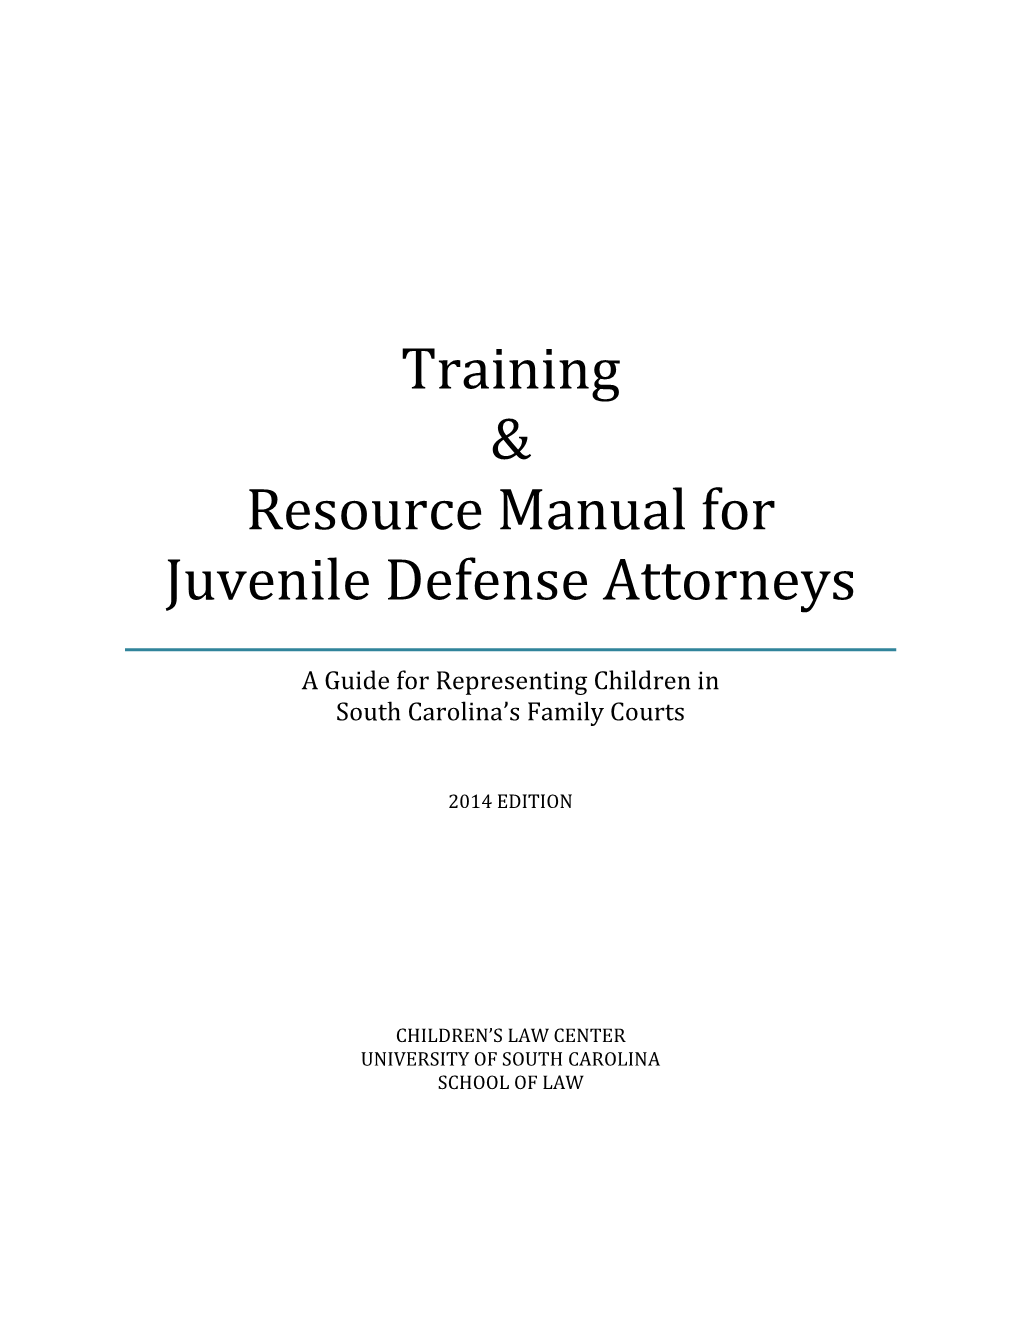 Training & Resource Manual for Juvenile Defense Attorneys